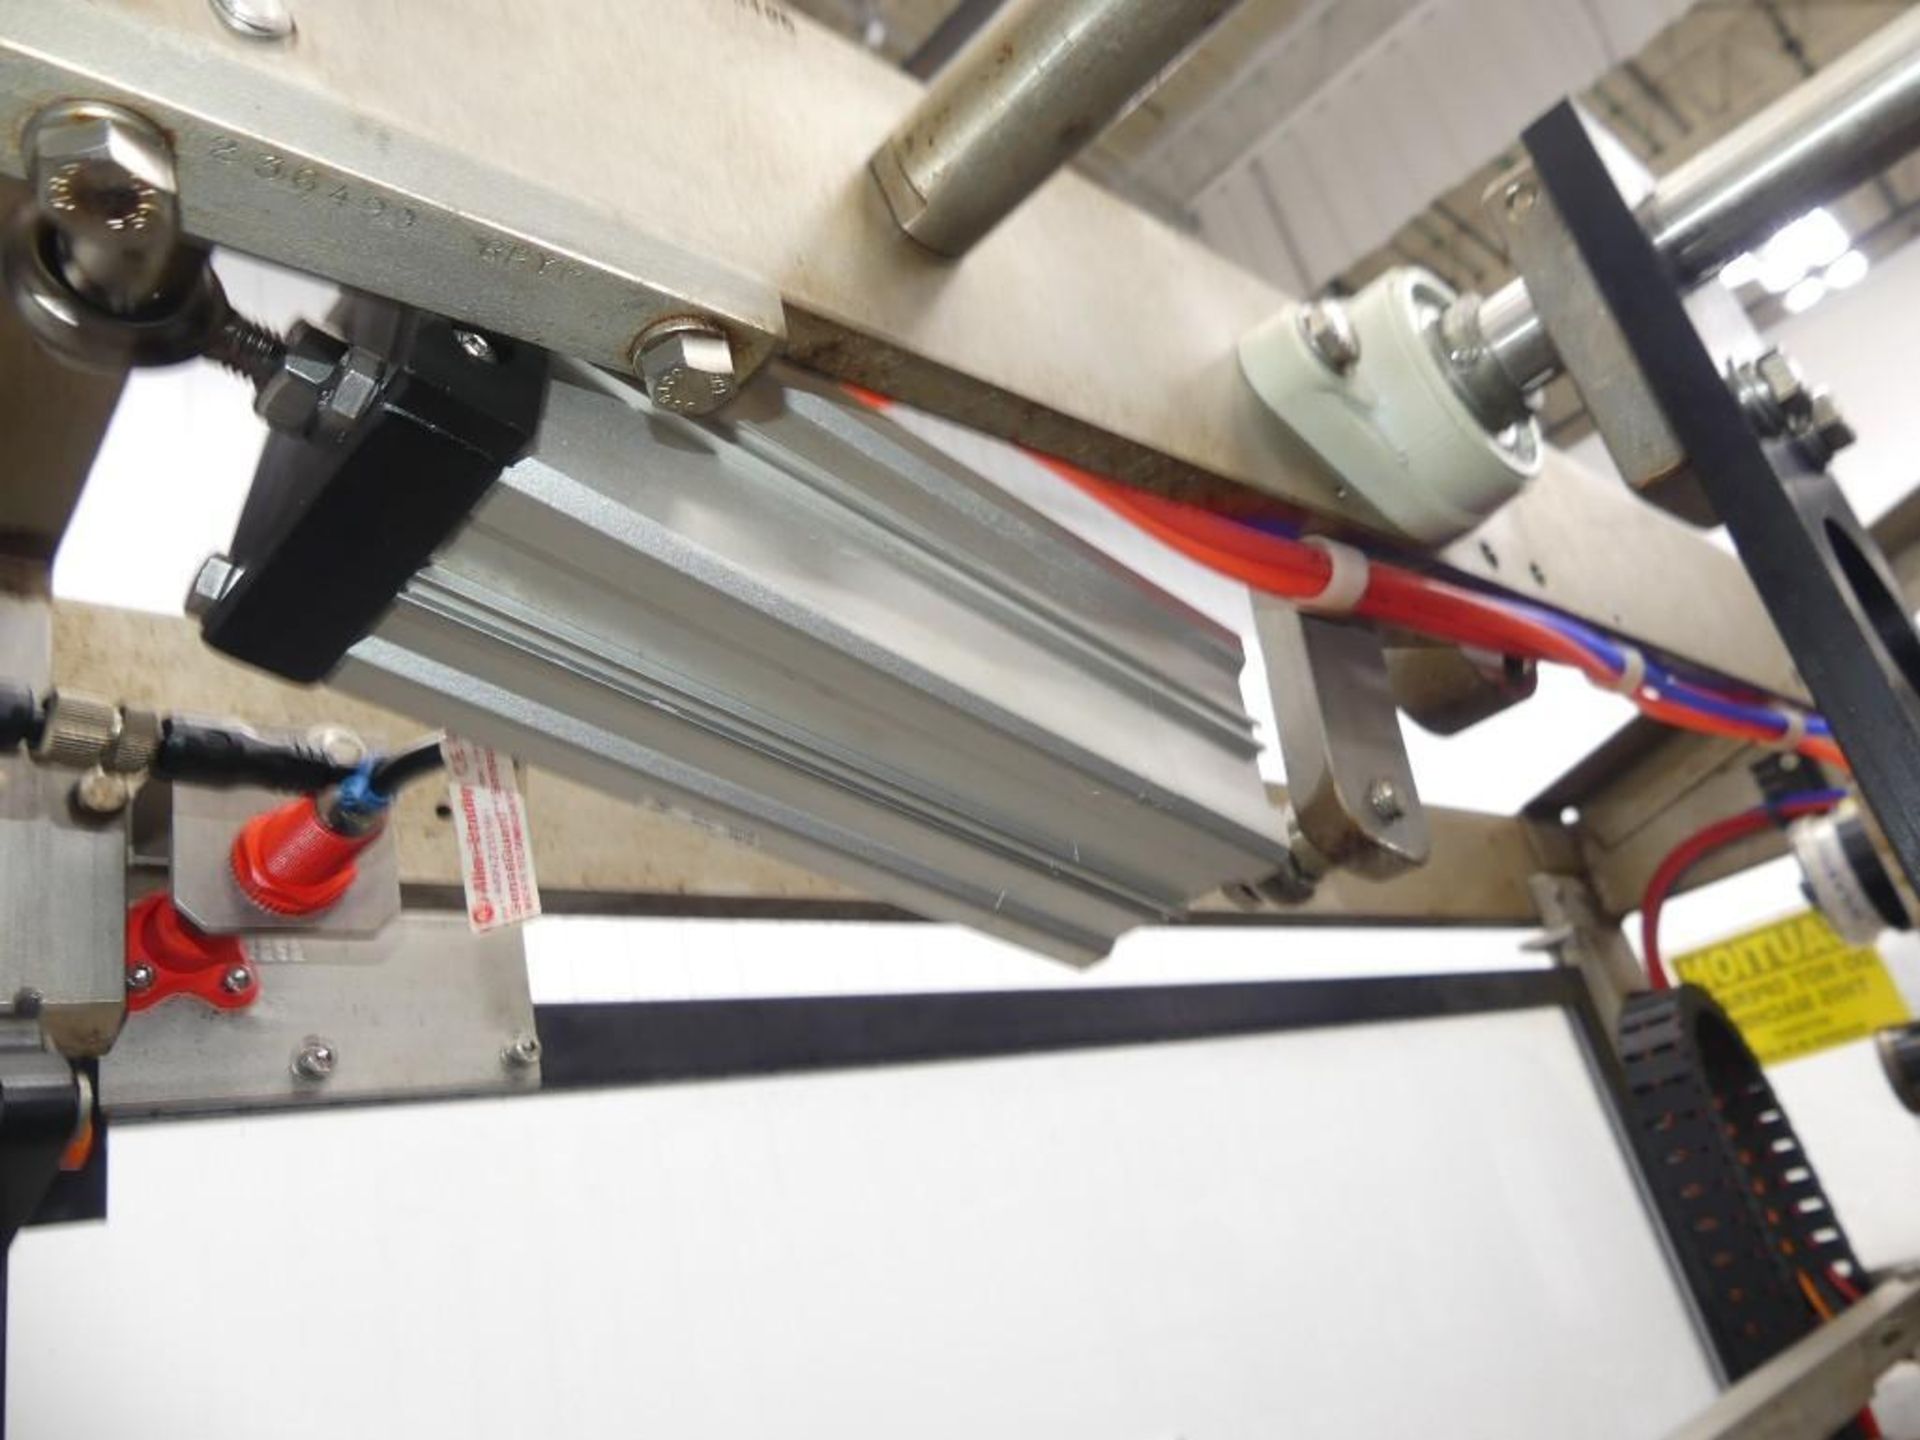 Massman HFFS-IM1000 Flexible Pouch Packaging System - Image 11 of 127